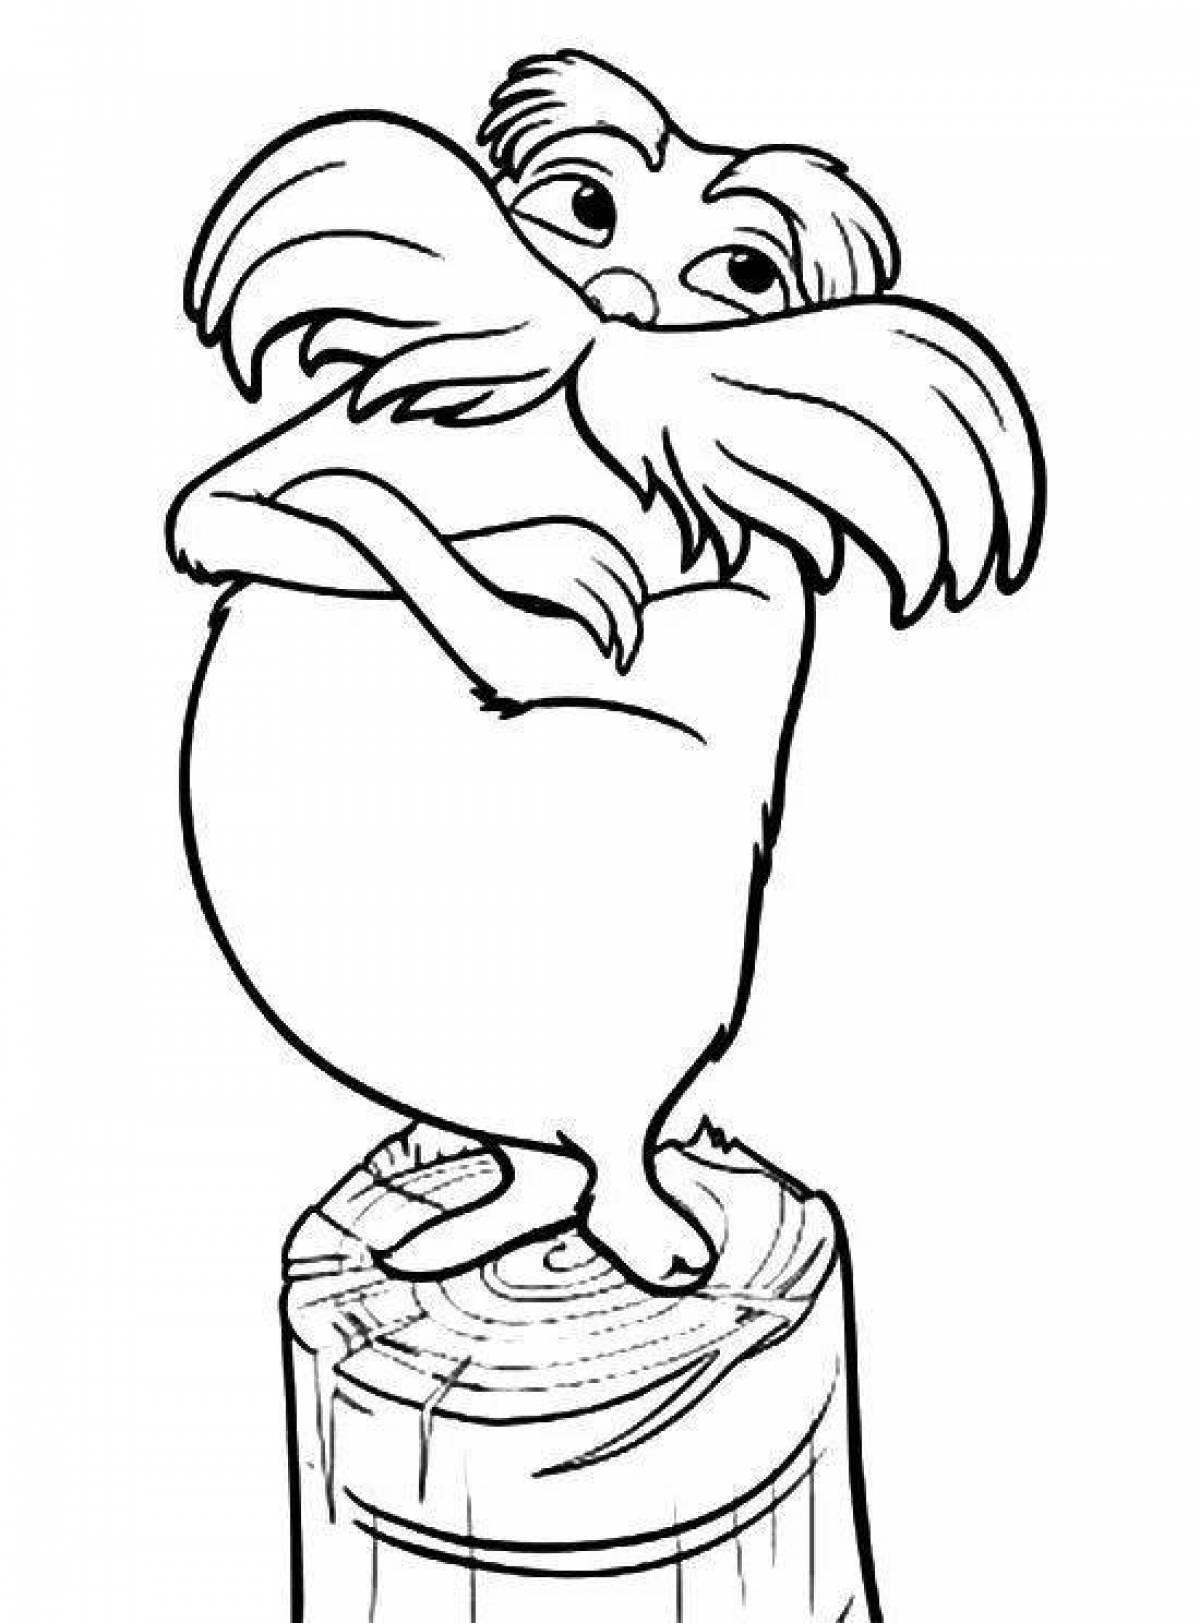 Amazing lorax coloring book